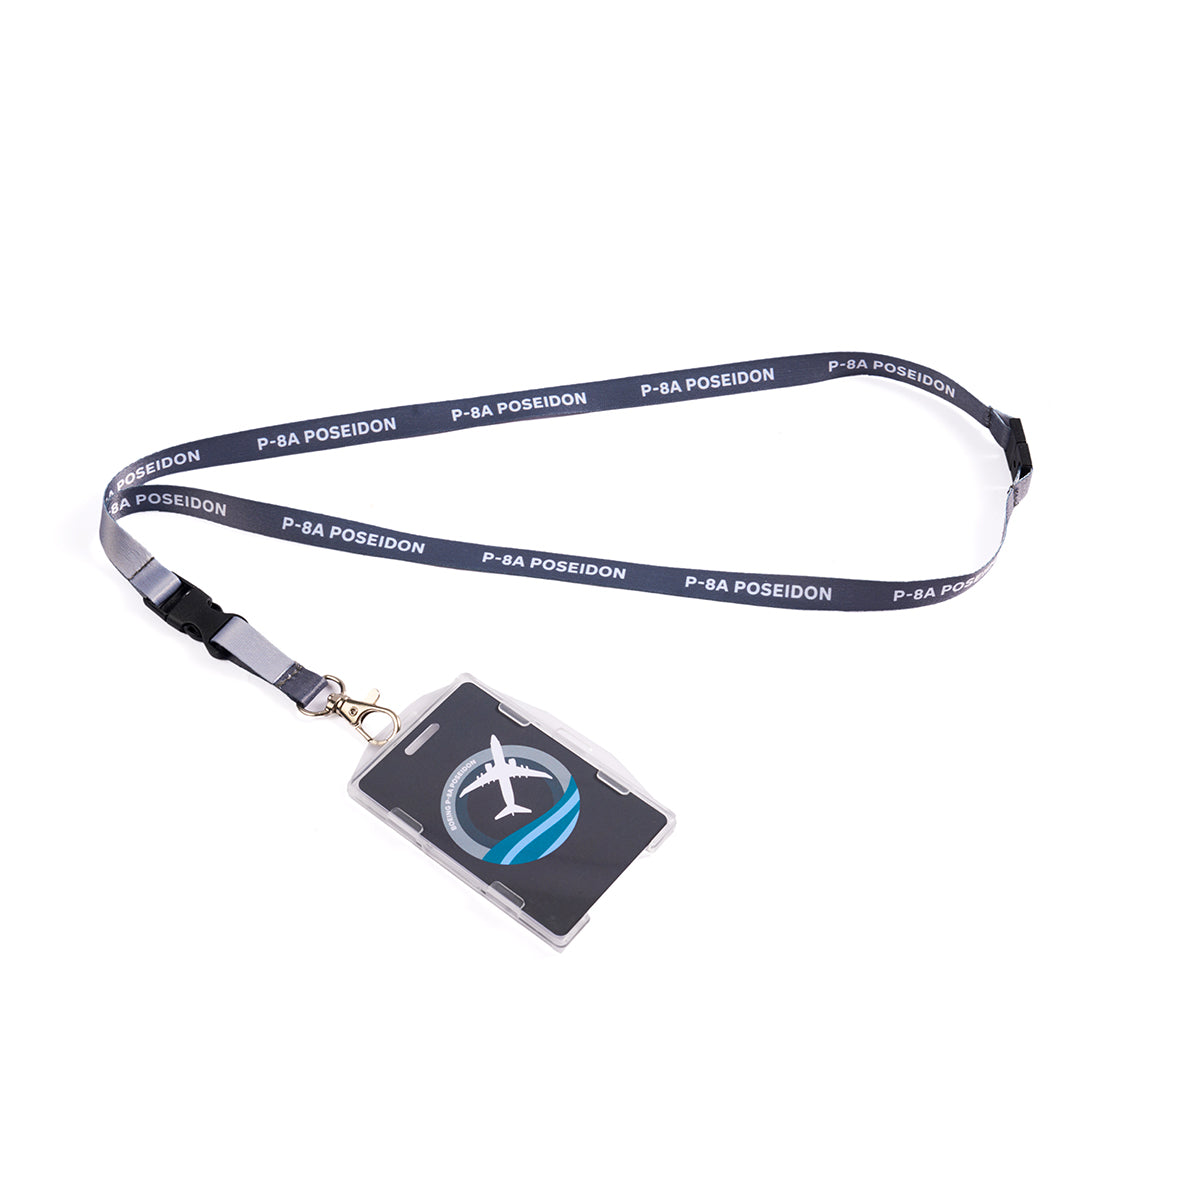 Full product image of the lanyard in navy blue. Boeing P-8 Poseidon Skyward sublimation print. Full printed PVC card with Boeing P-8 Poseidon Skyward roundel design.